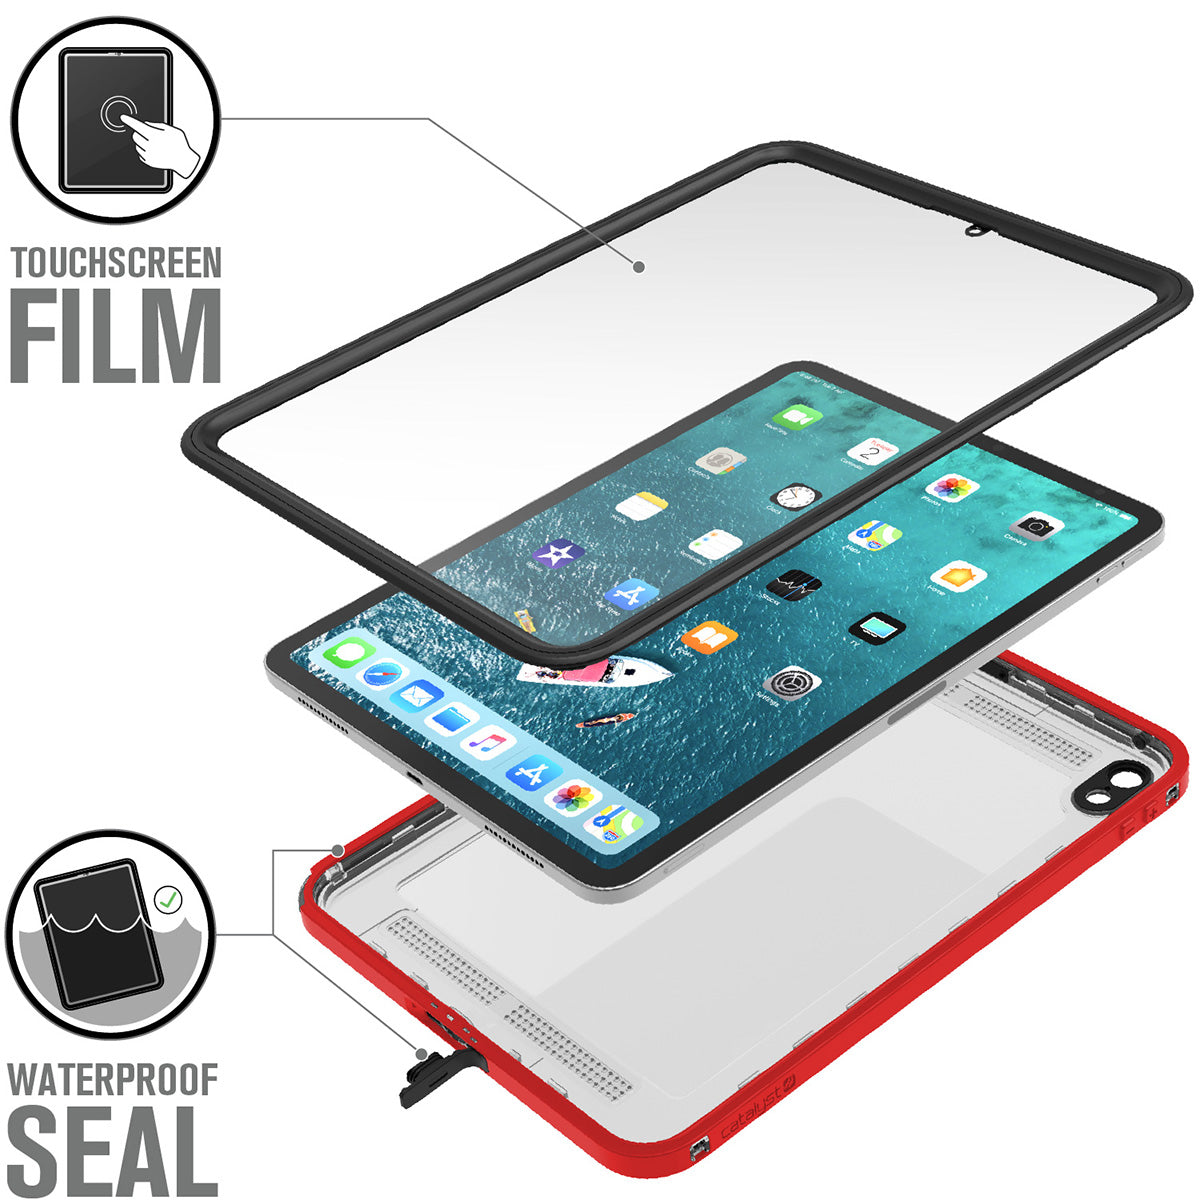 Catalyst iPad Pro (Gen 1), 11" - Waterproof Case showing an ipad with the front and back of the case text reads touchscreen film waterproof seal